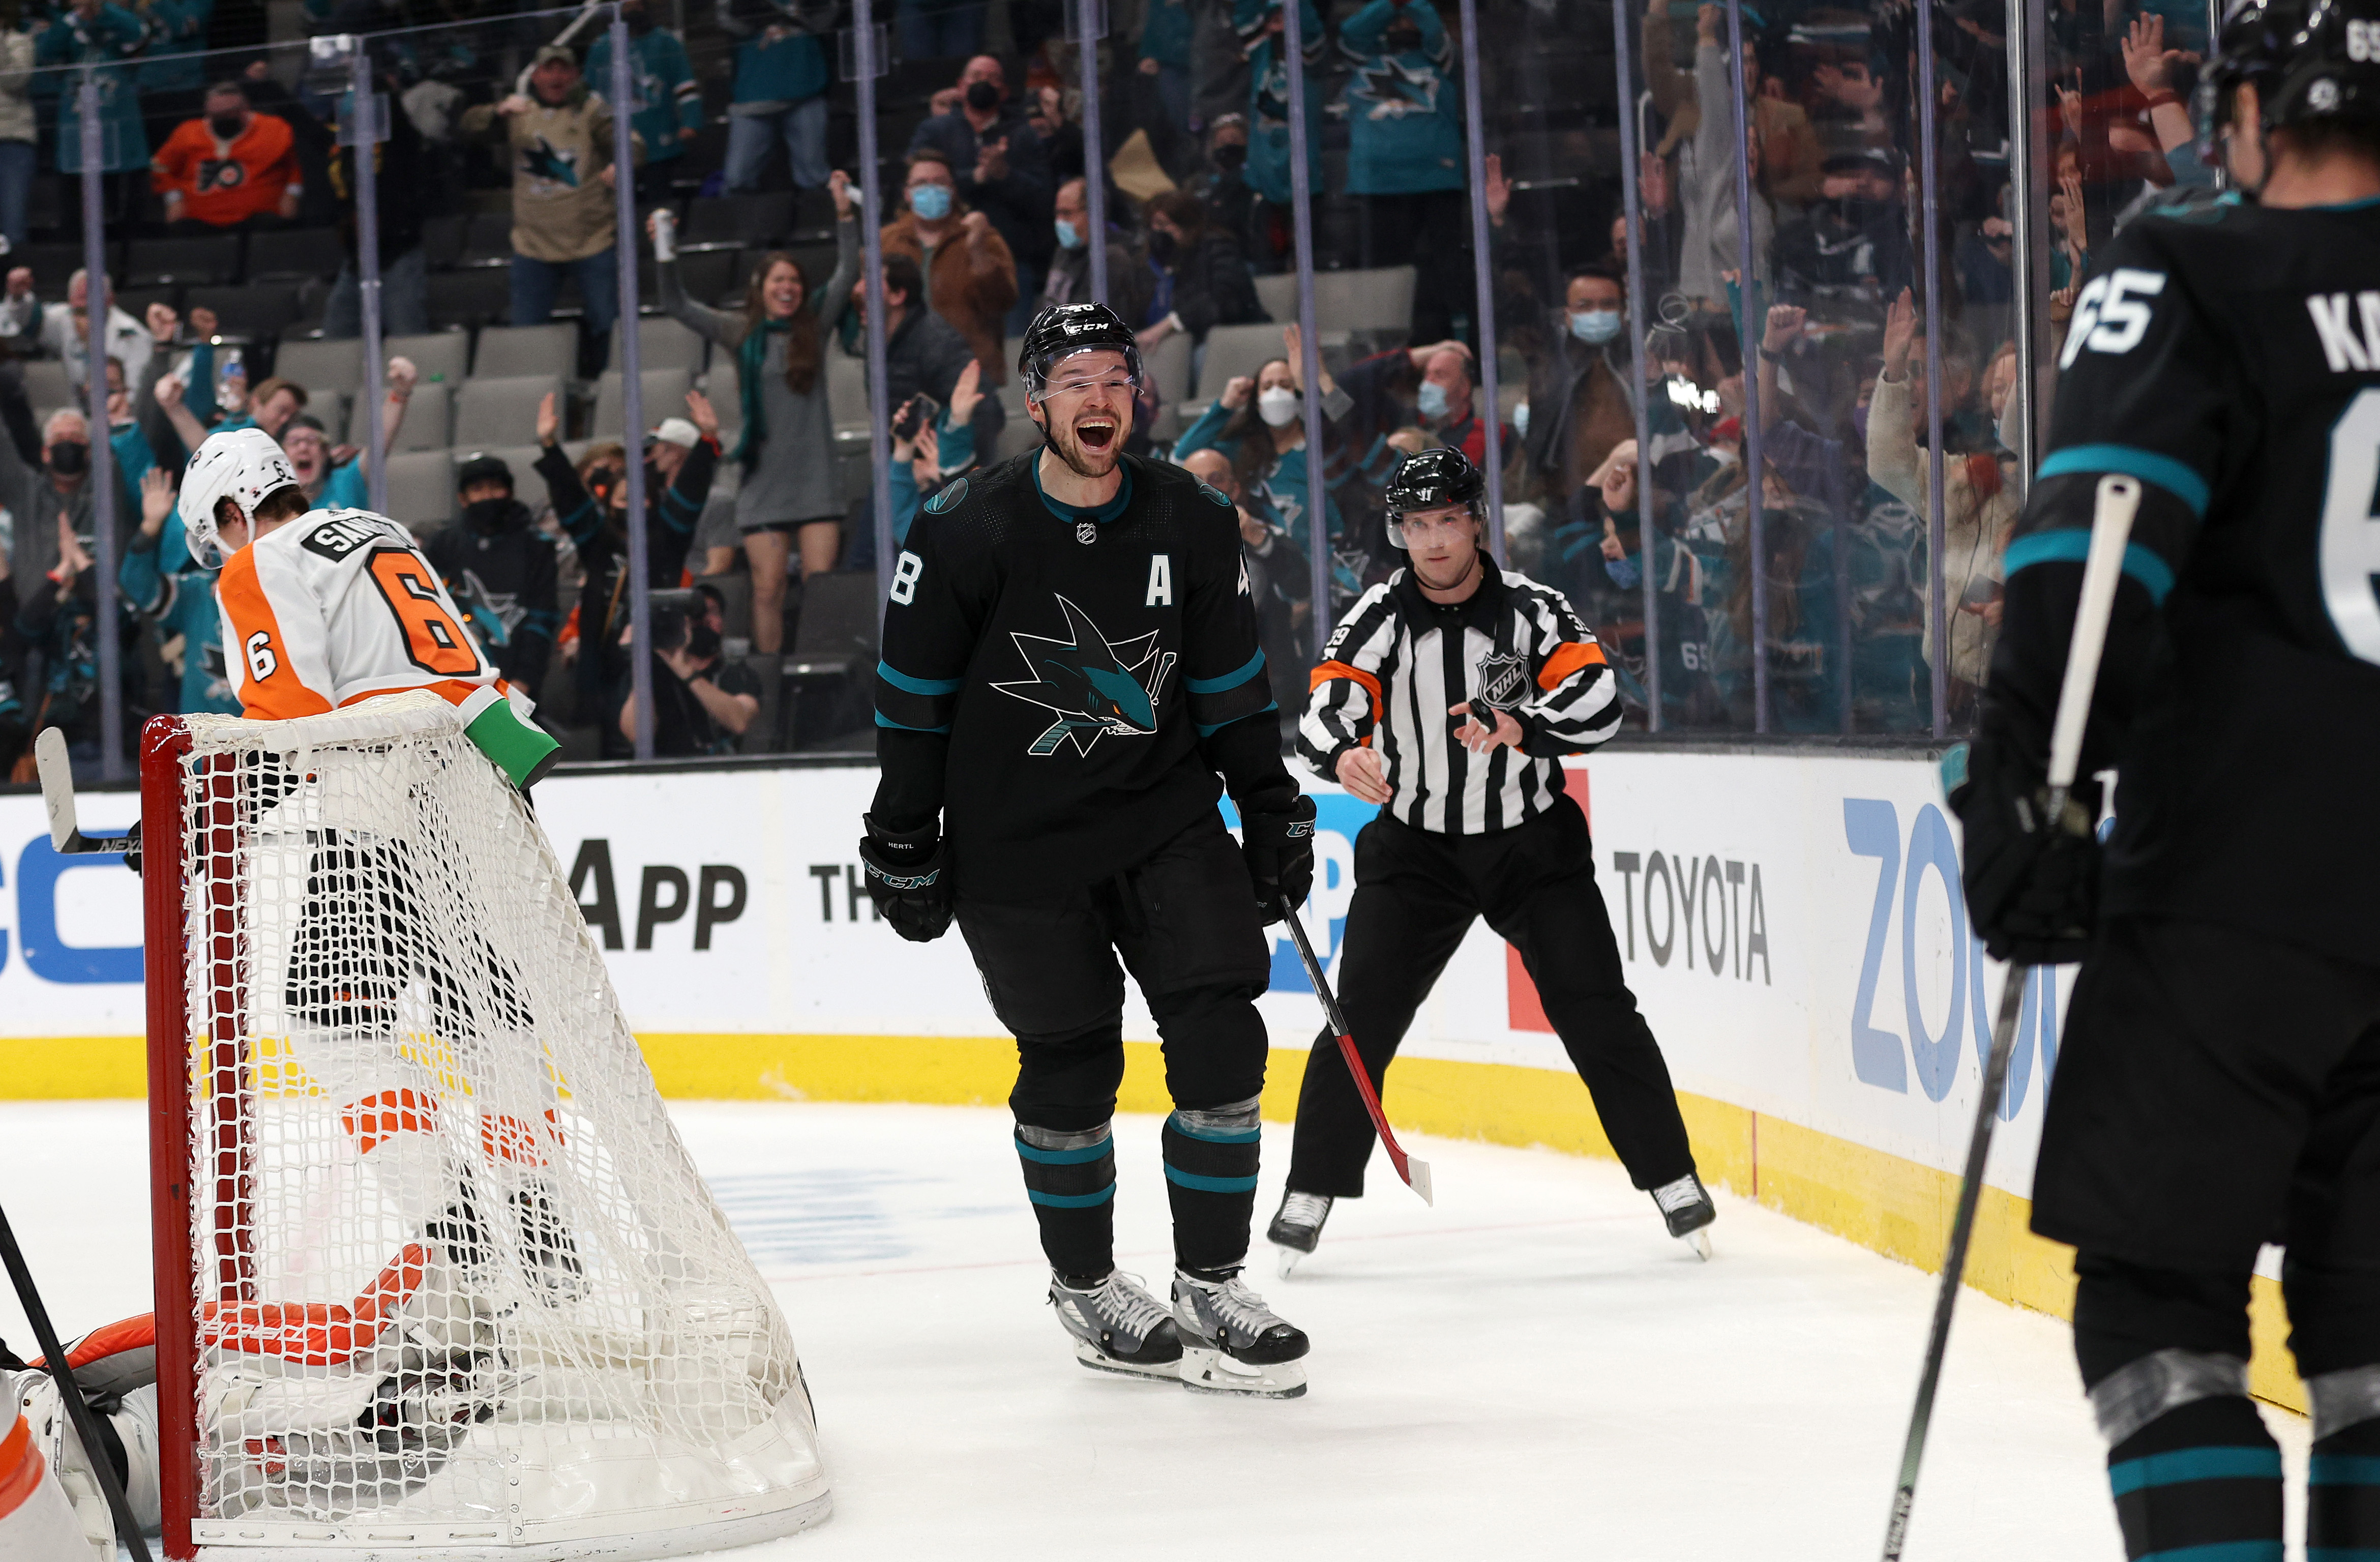 Tomas Hertl #48 of the San Jose Sharks reacts after he scored the winning goal on Felix Sandstrom #32 of the Philadelphia Flyers in overtime at SAP Center on December 30, 2021 in San Jose, California.